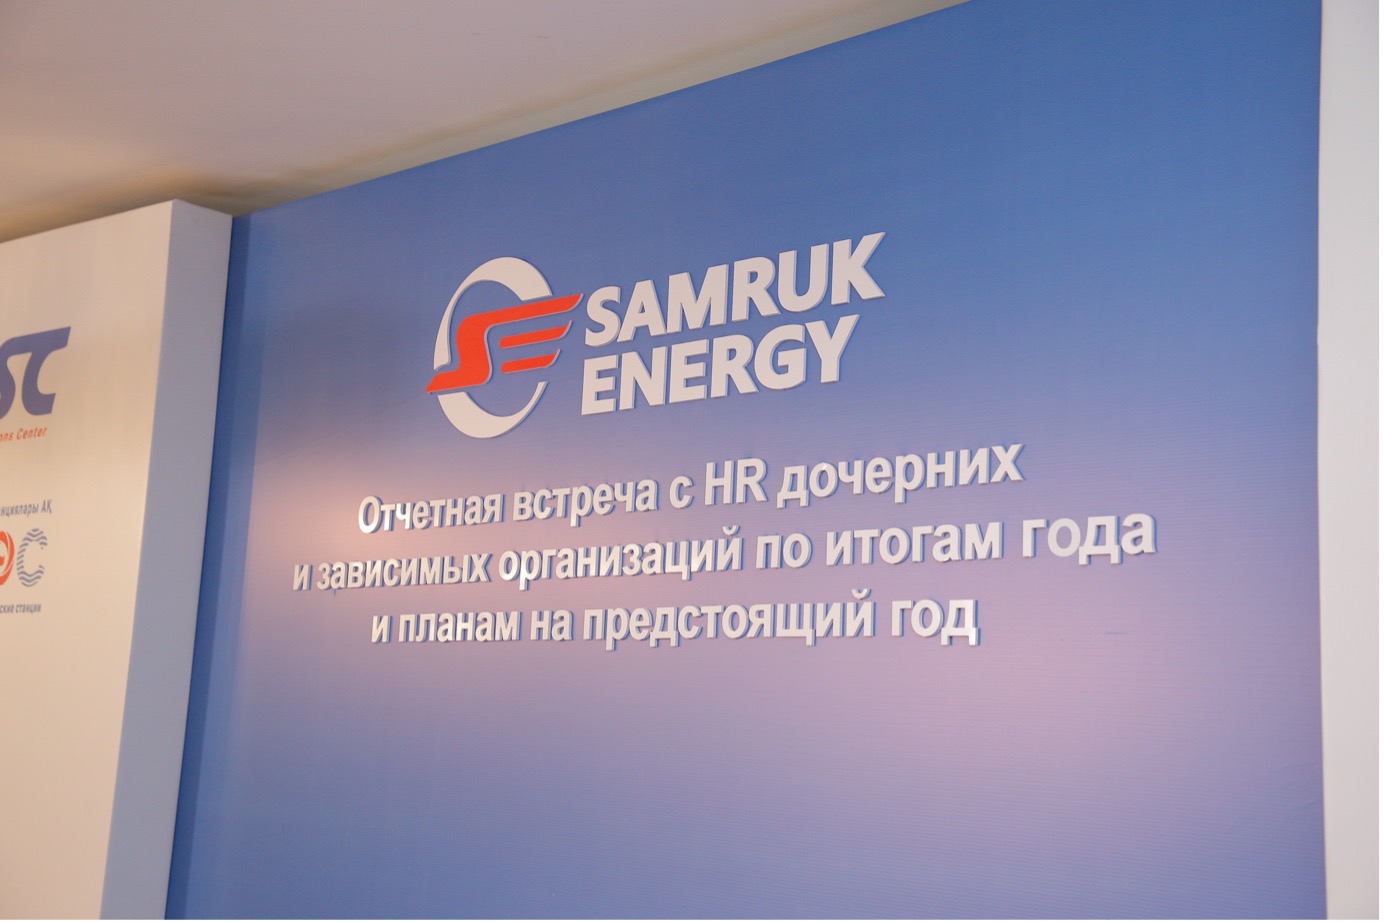 HR Specialists from Samruk-Energy Group discuss current issues and solutions